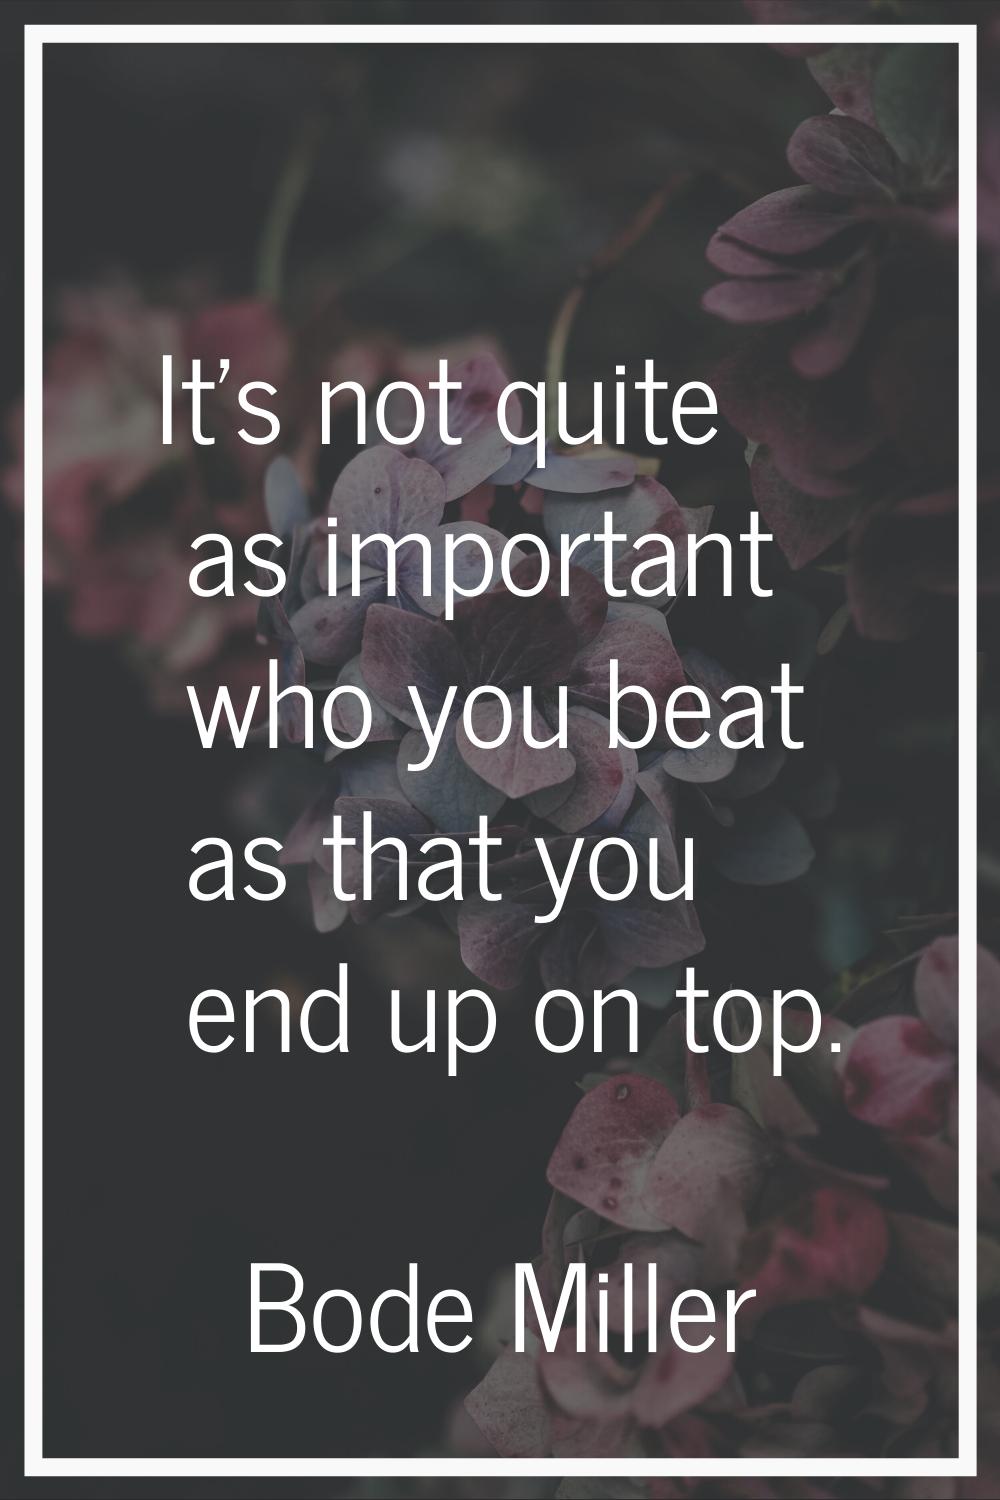 It's not quite as important who you beat as that you end up on top.